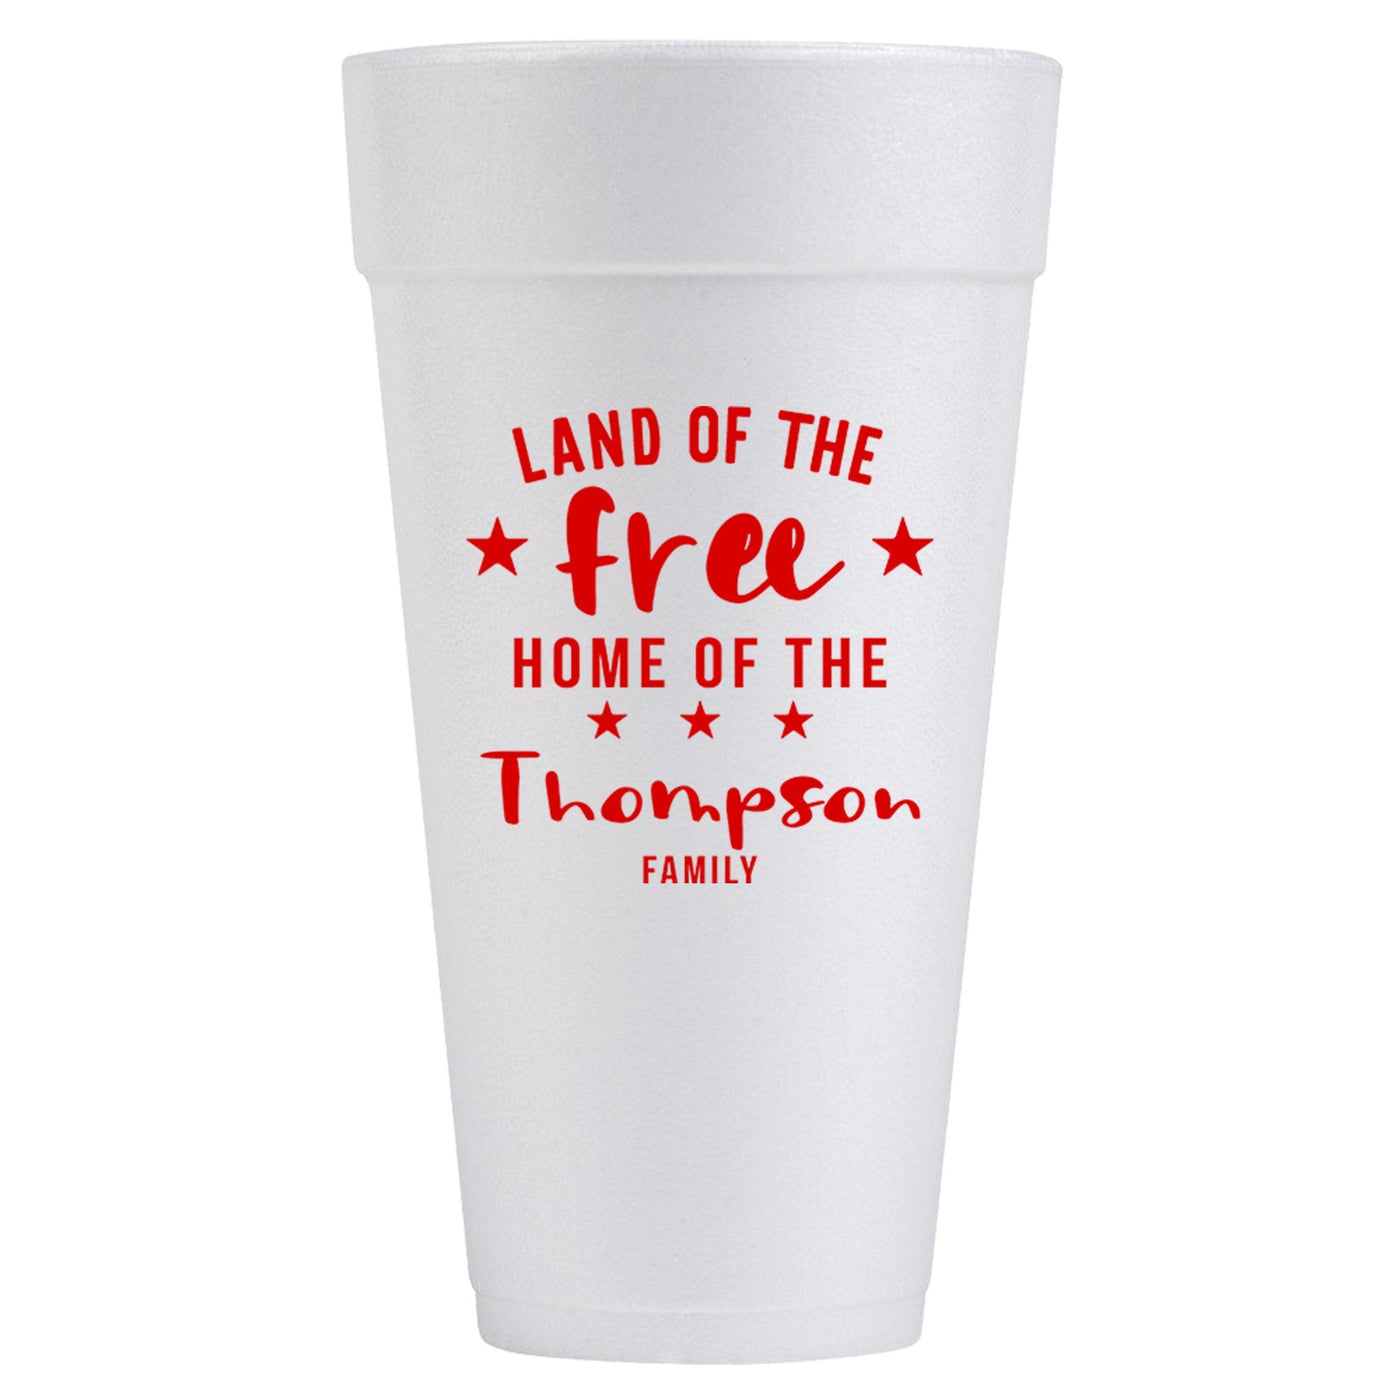 America Y'all Patriotic Summer 24oz Foam Barbecue Cups 25ct - Land of the Free Home of the Brave - JJ's Party House